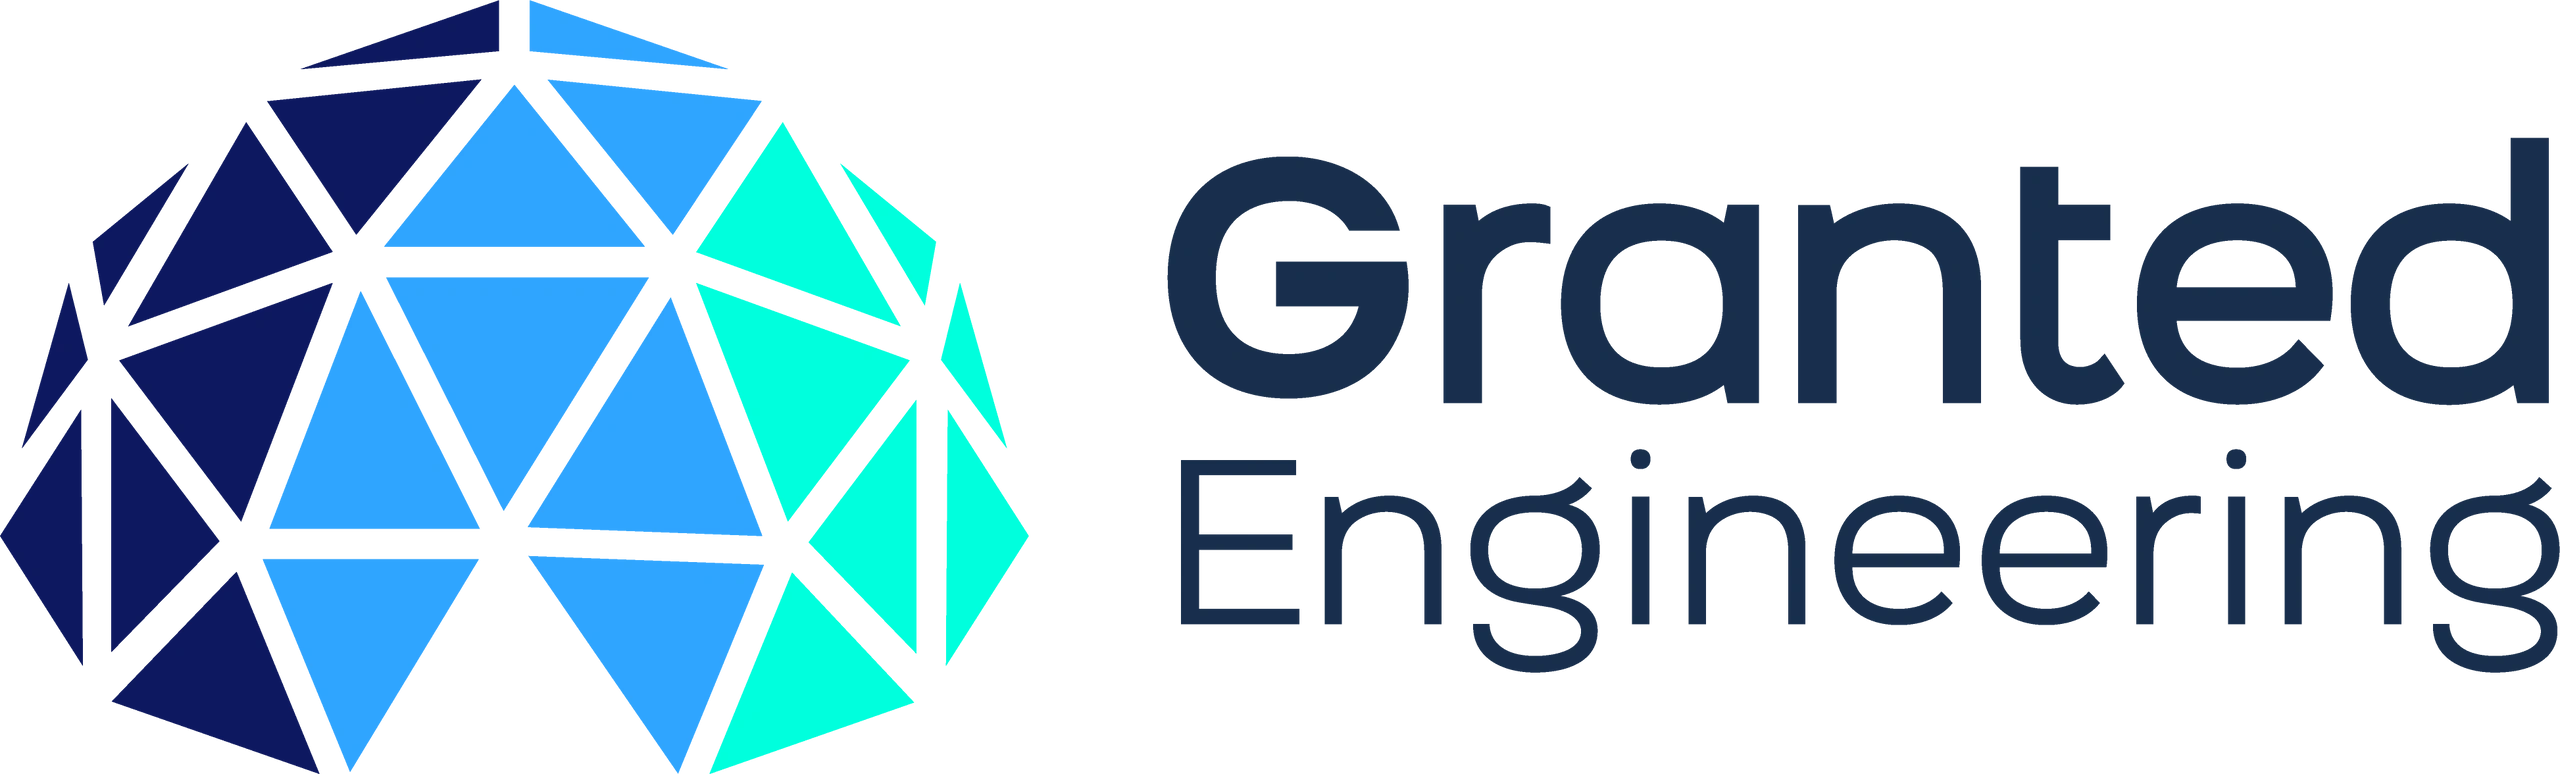 https://img1.wsimg.com/isteam/ip/d41d4ef7-4677-4707-8c43-13a0c965a49c/granted%20engineering_logo.png/:/cr=t:0%25,l:0%25,w:100%25,h:100%25